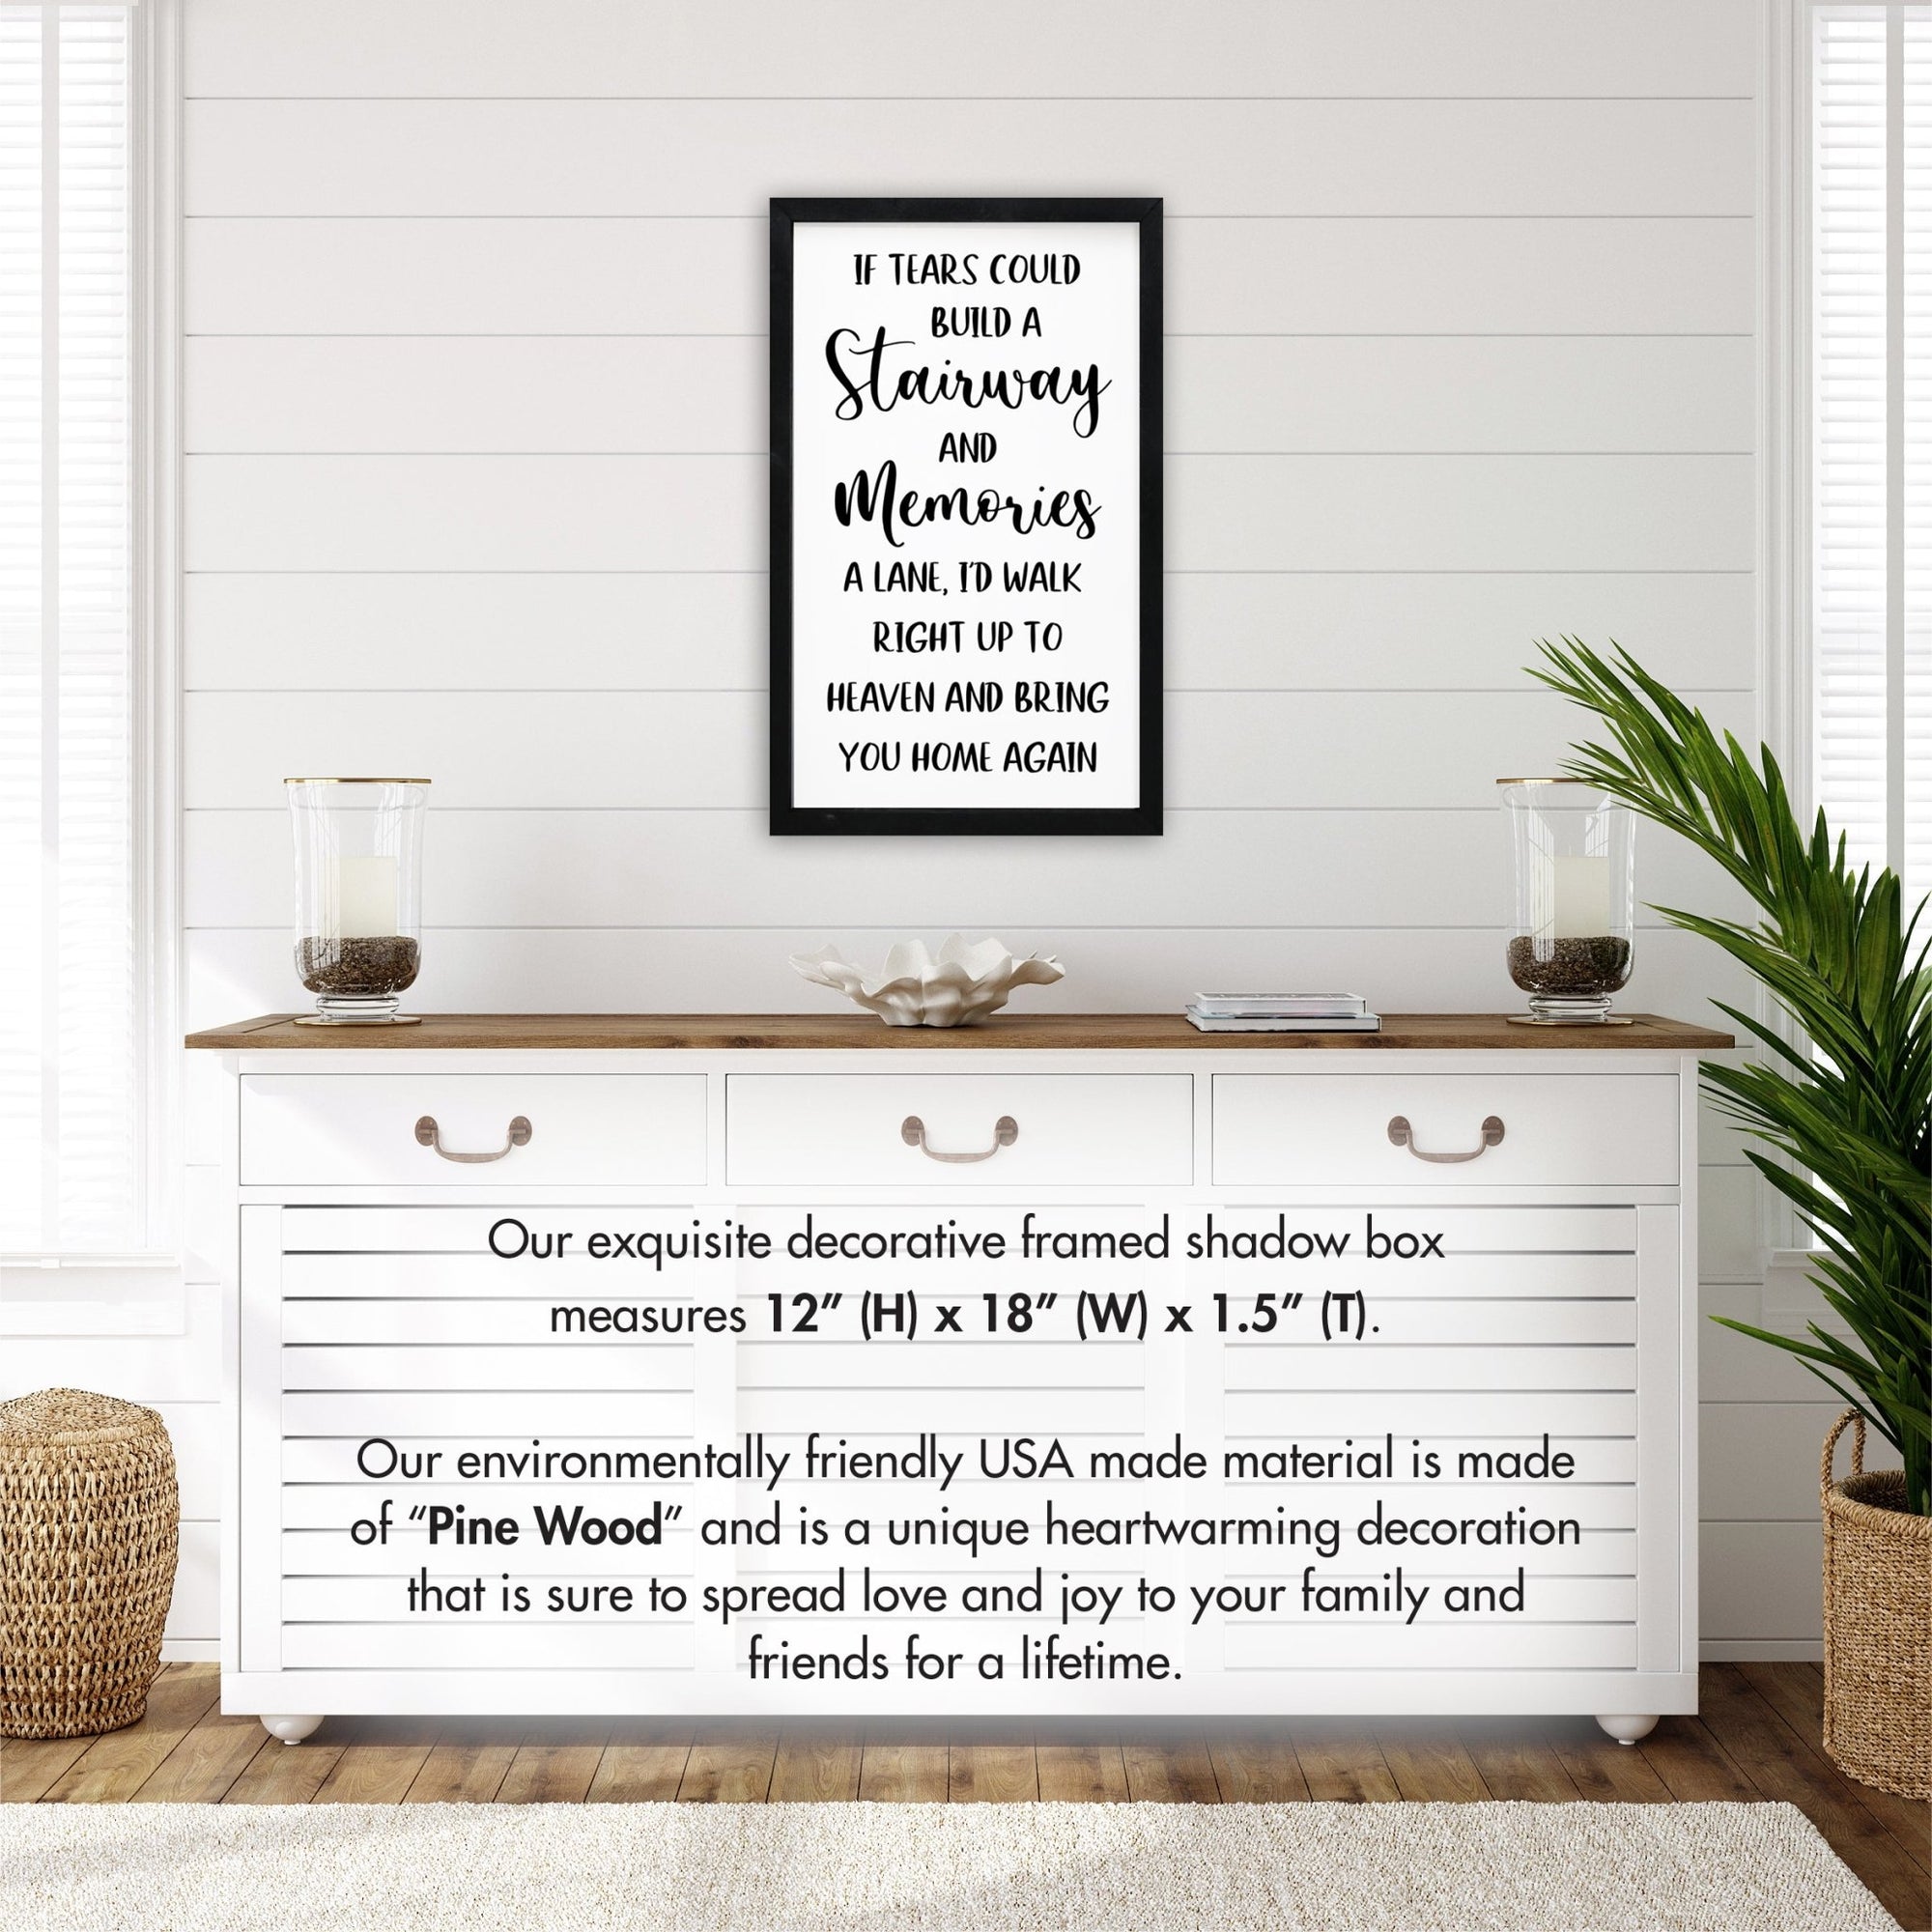 Memorial Framed Shadow Box For Home Décor - If Tears Could Build a Stairway to Heaven